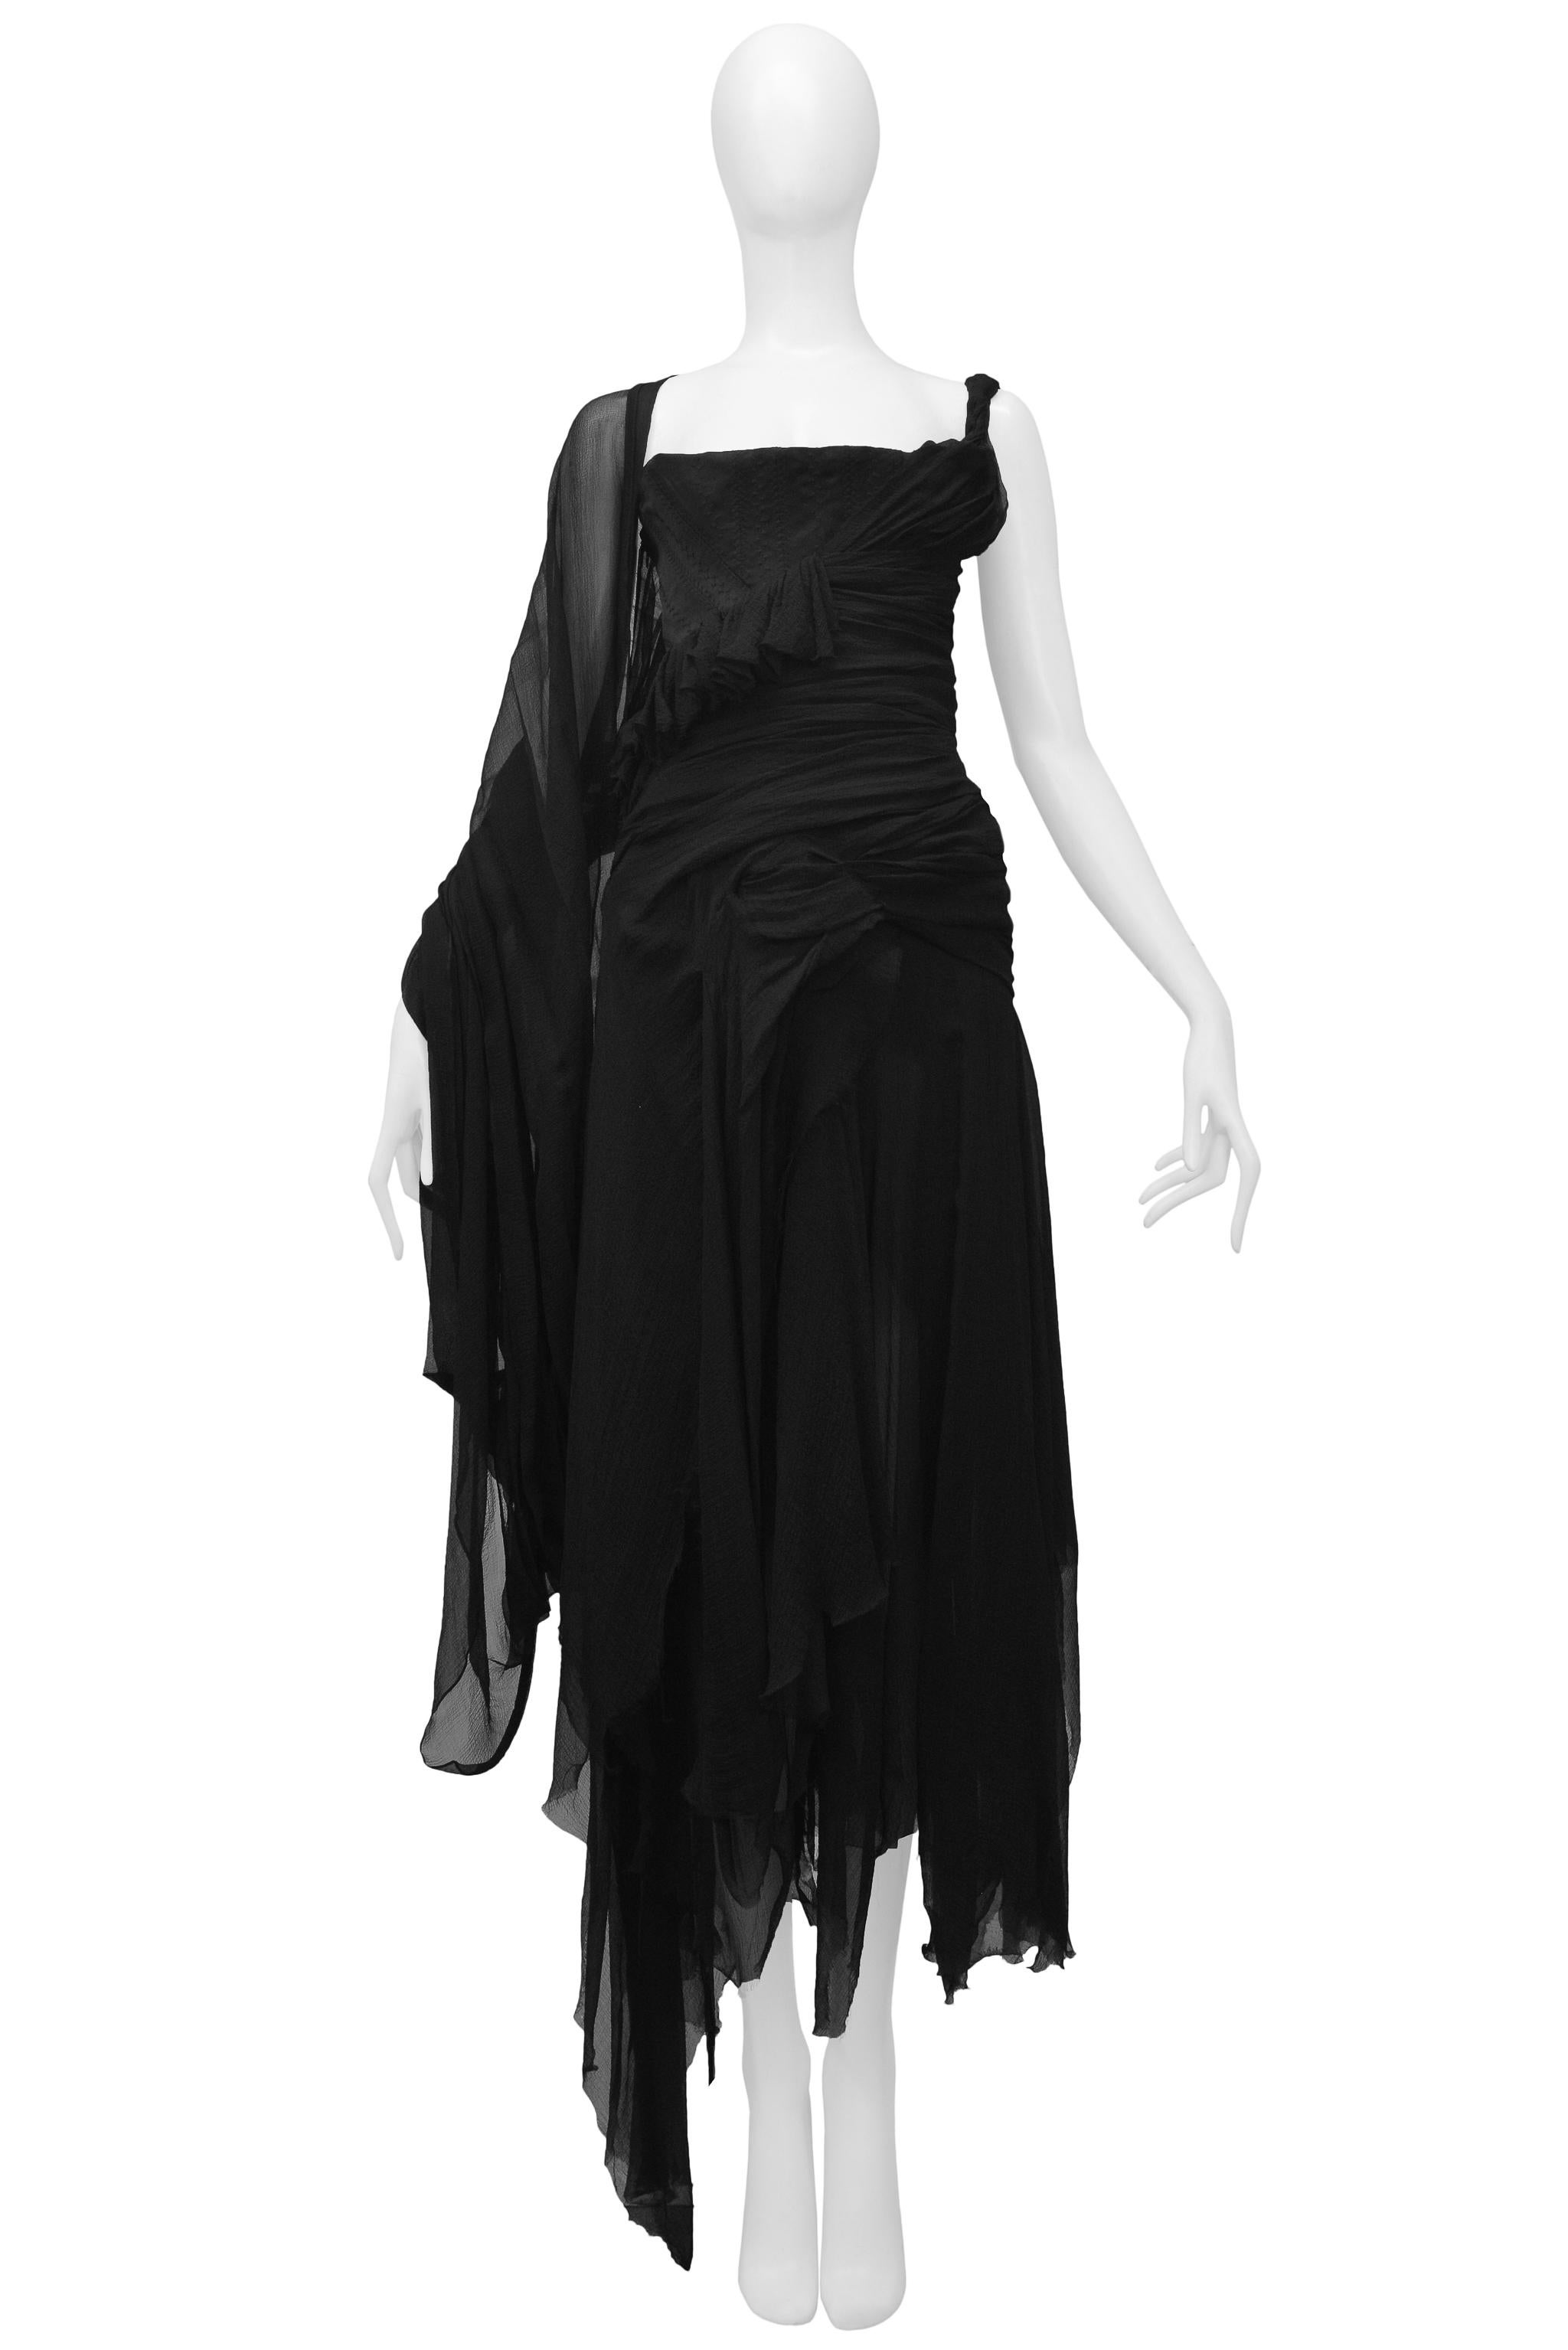 Resurrection Vintage is excited to offer an Alexander McQueen black chiffon dress featuring ruched chiffon along the front and back, buckle detail at the back, and a straight front neckline.
Alexander McQueen
Size 42
Silk Chiffon
2003 Irere